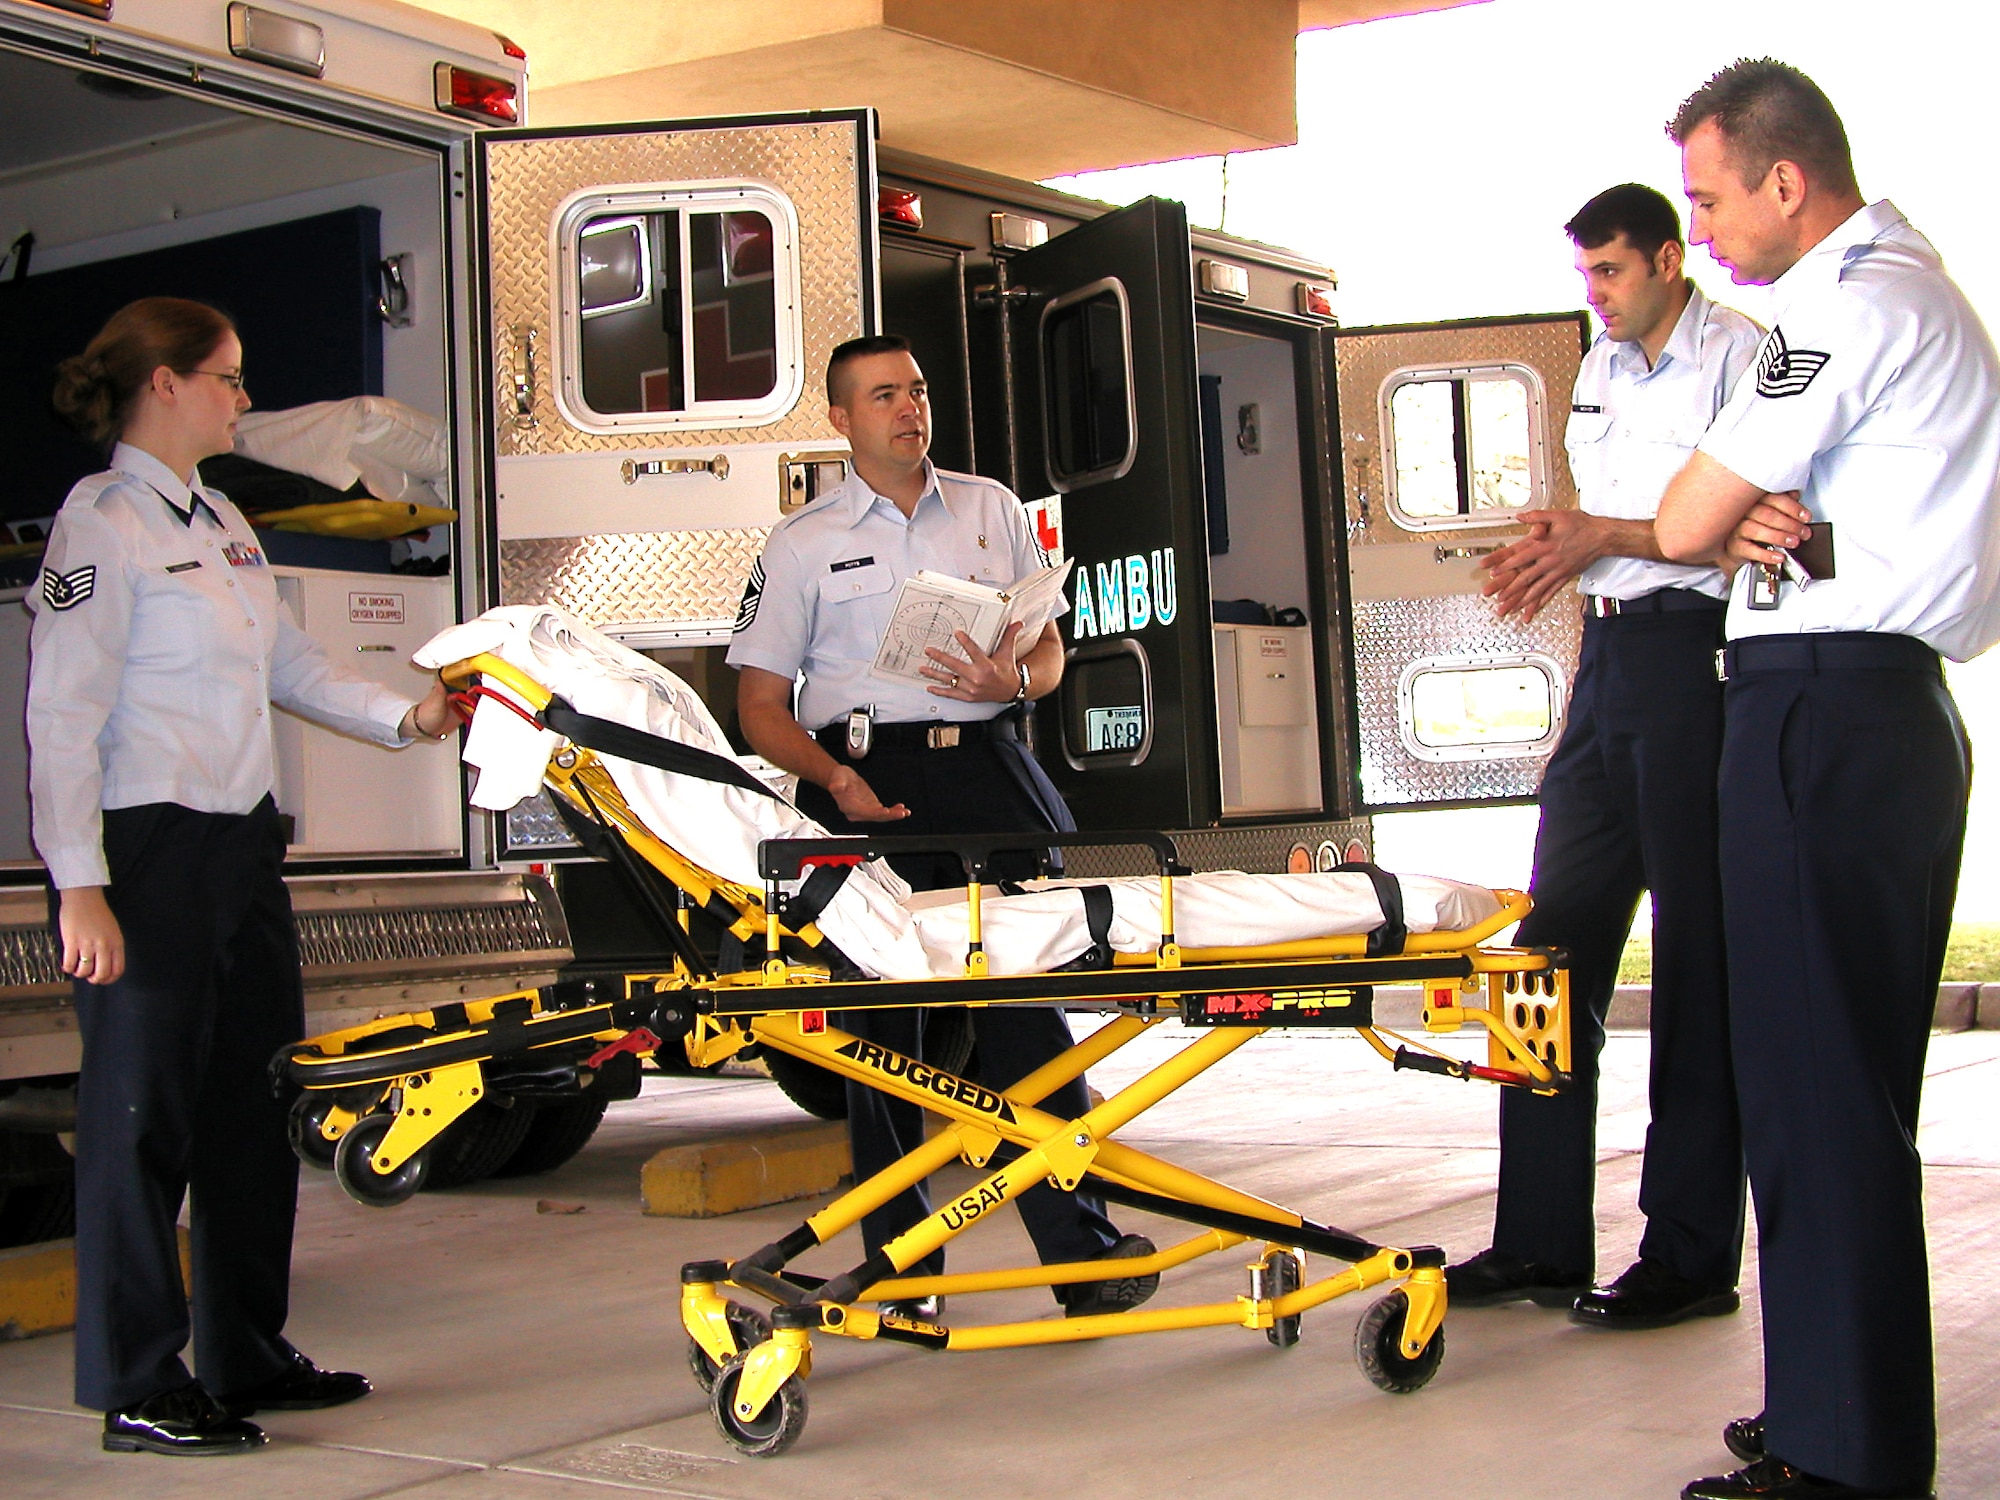 KIRTLAND AIR FORCE BASE, N.M. -- Chief Master Sgt. Joseph Potts (center) evaluates an ambulance crew's ability to operate equipment during a recent health services inspection. He is an Air Force Inspection Agency inspector here.  (U.S. Air Force photo by Capt. Gabe Johnson)
      